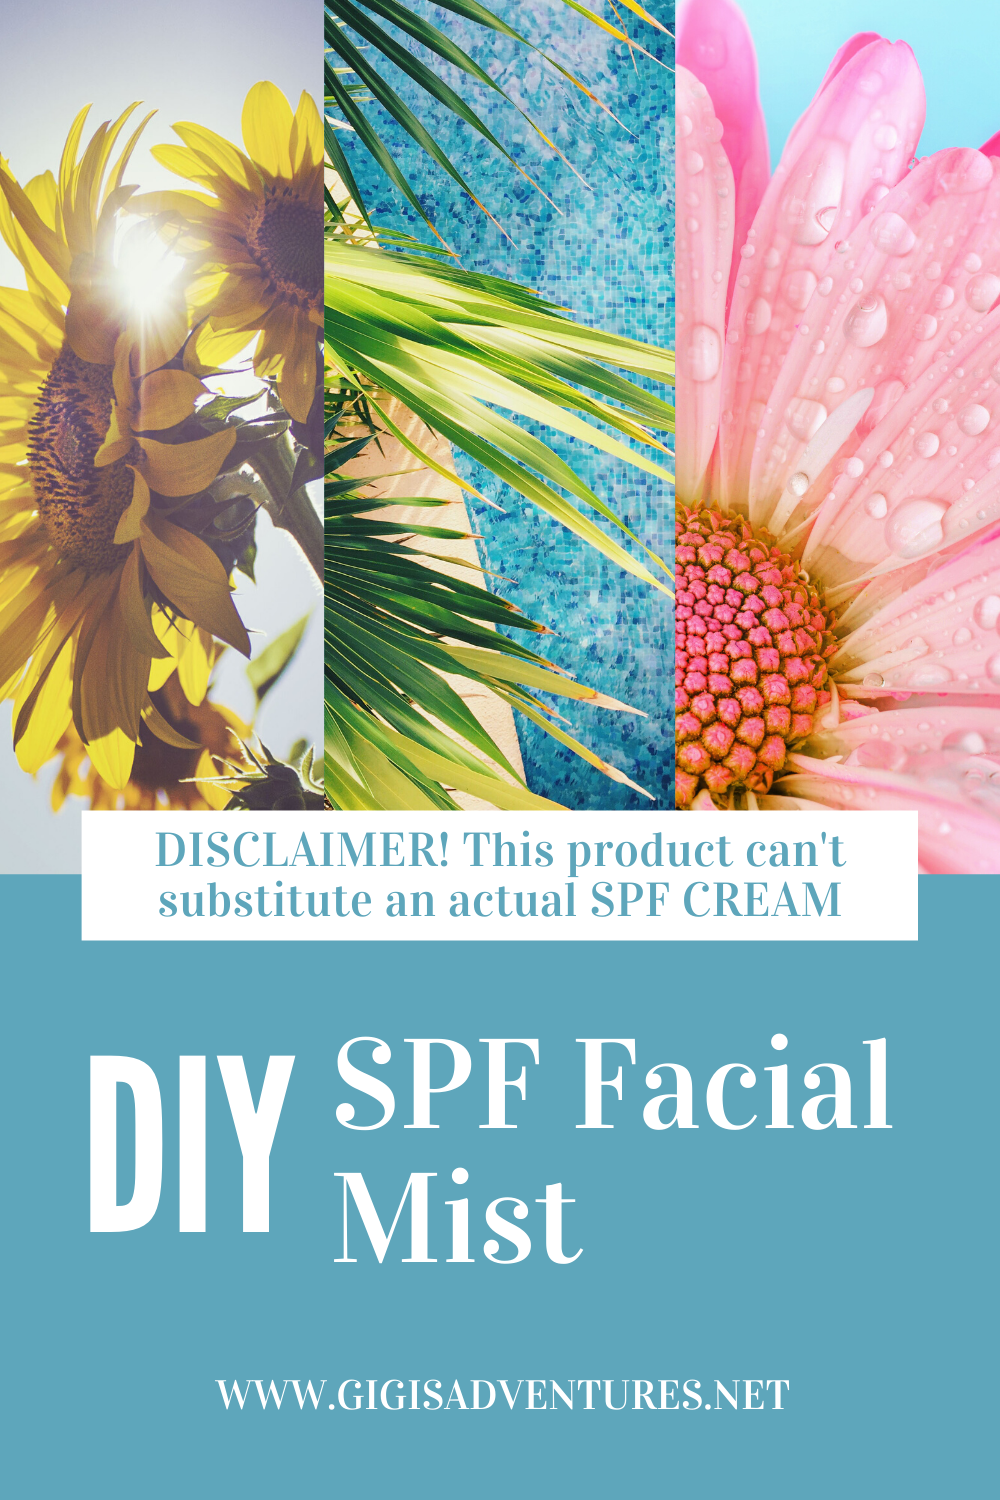 DIY SPF Facial Mist - Perfect To Use Throughout The Day!